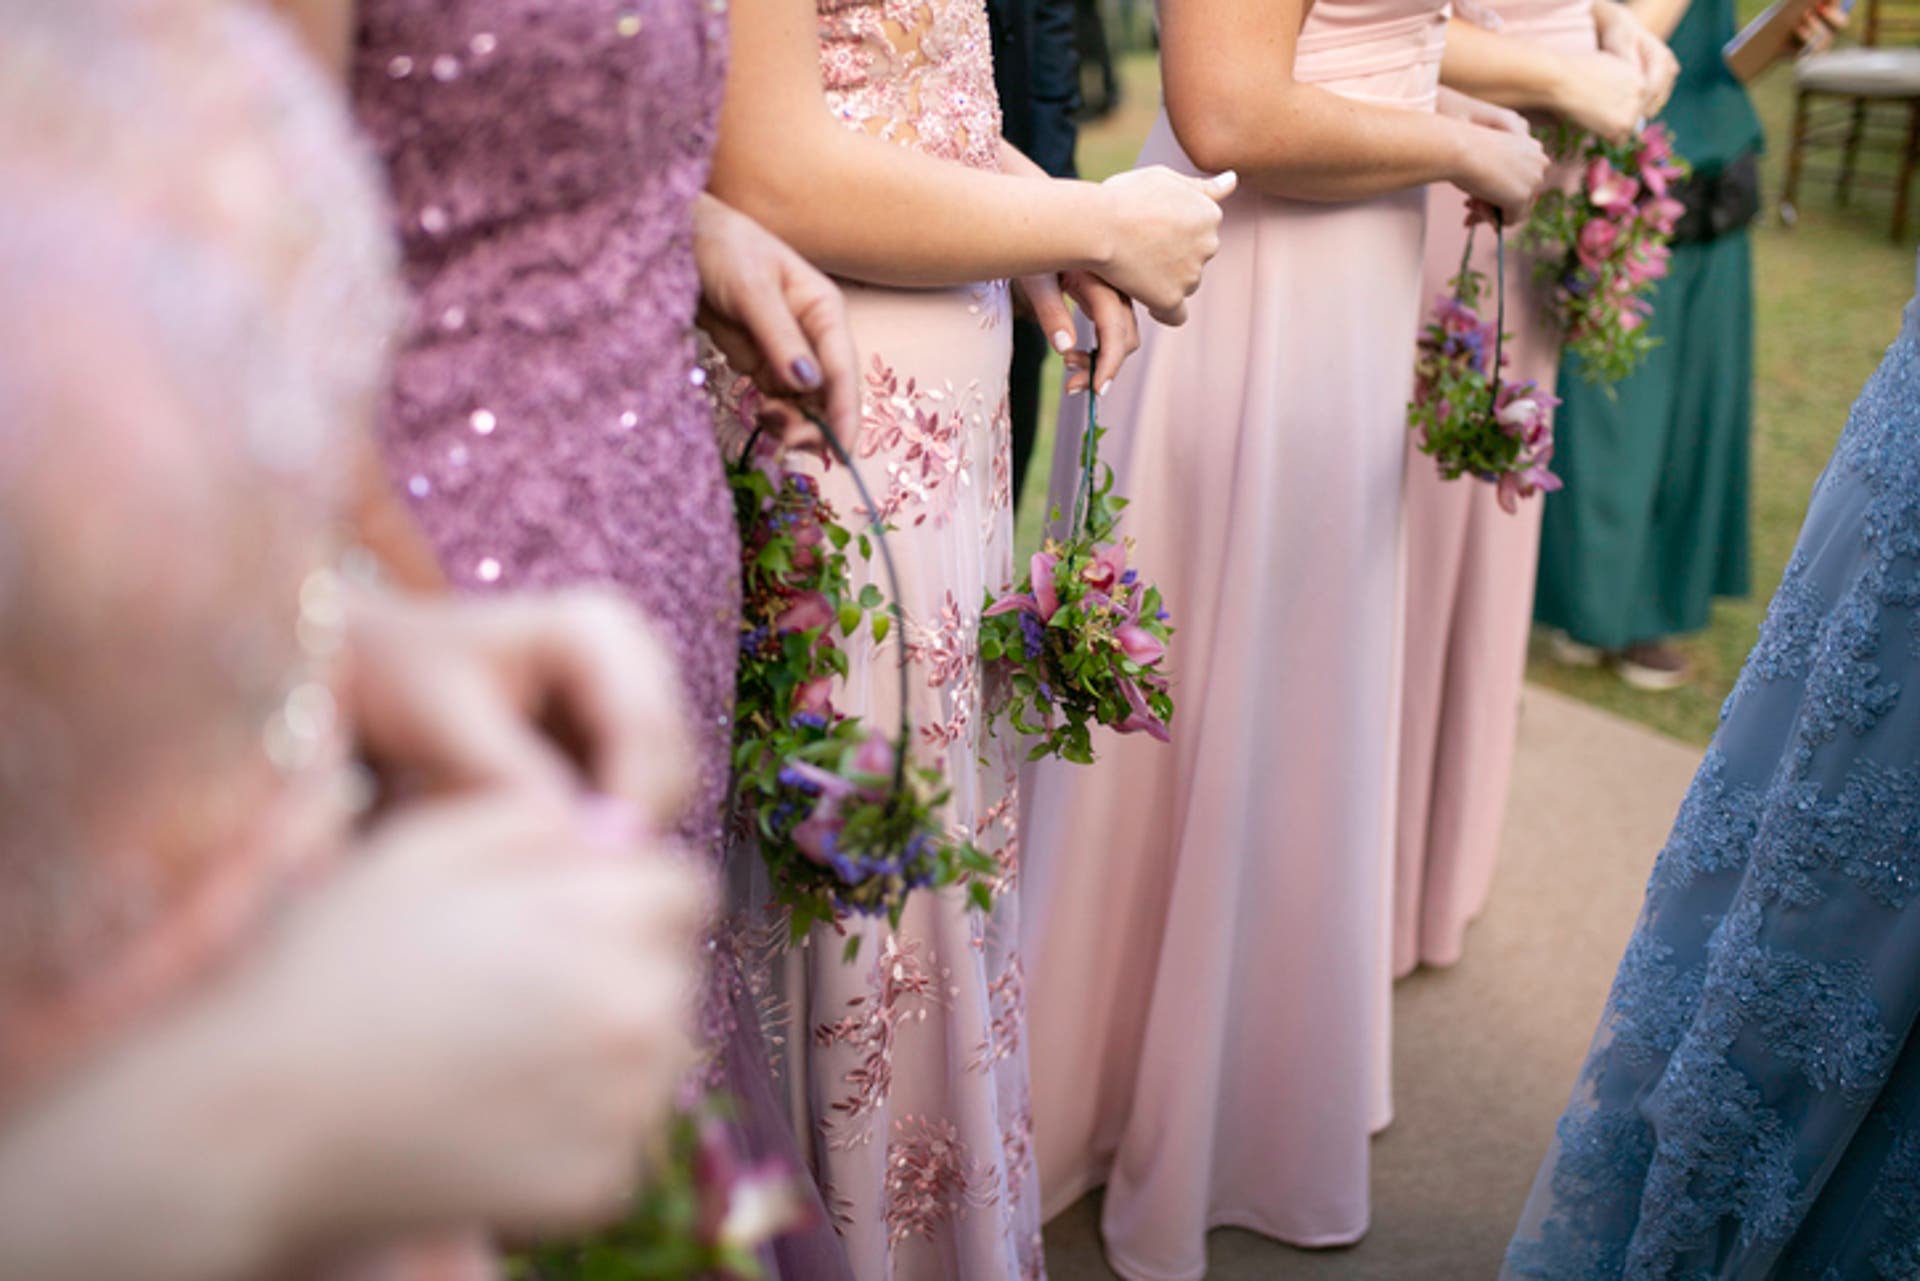  several people in dresses at a wedding 